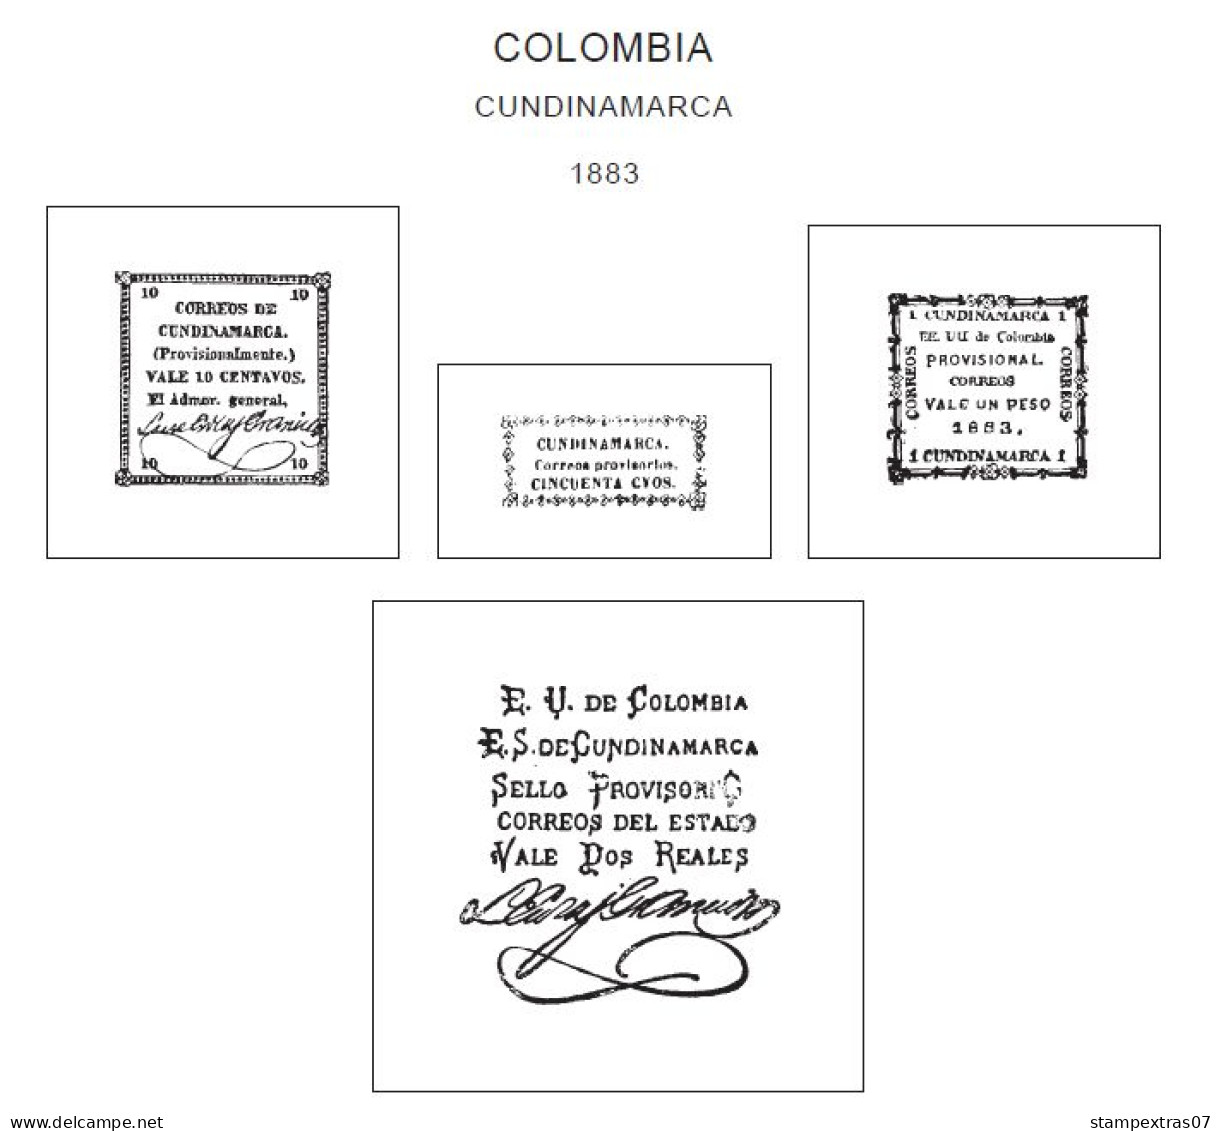 COLOMBIA STAMP ALBUM PAGES 1859-2011 (353 Pages) - Inglés